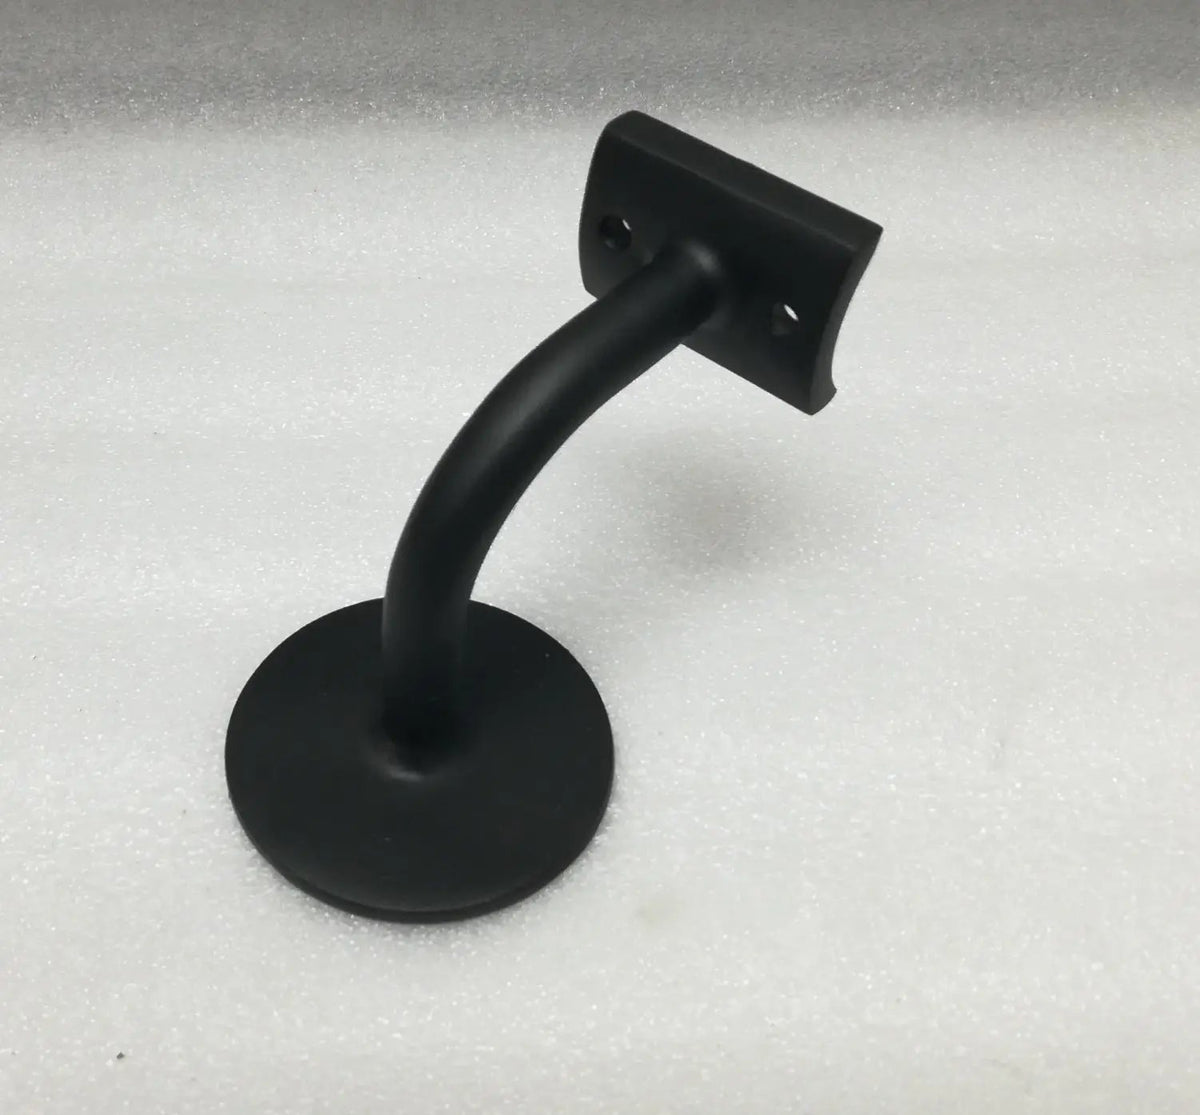 Blind-Stud Hand Rail Bracket for 2" Tubing Brackets, Components for 2" Od TubingTrade Diversified